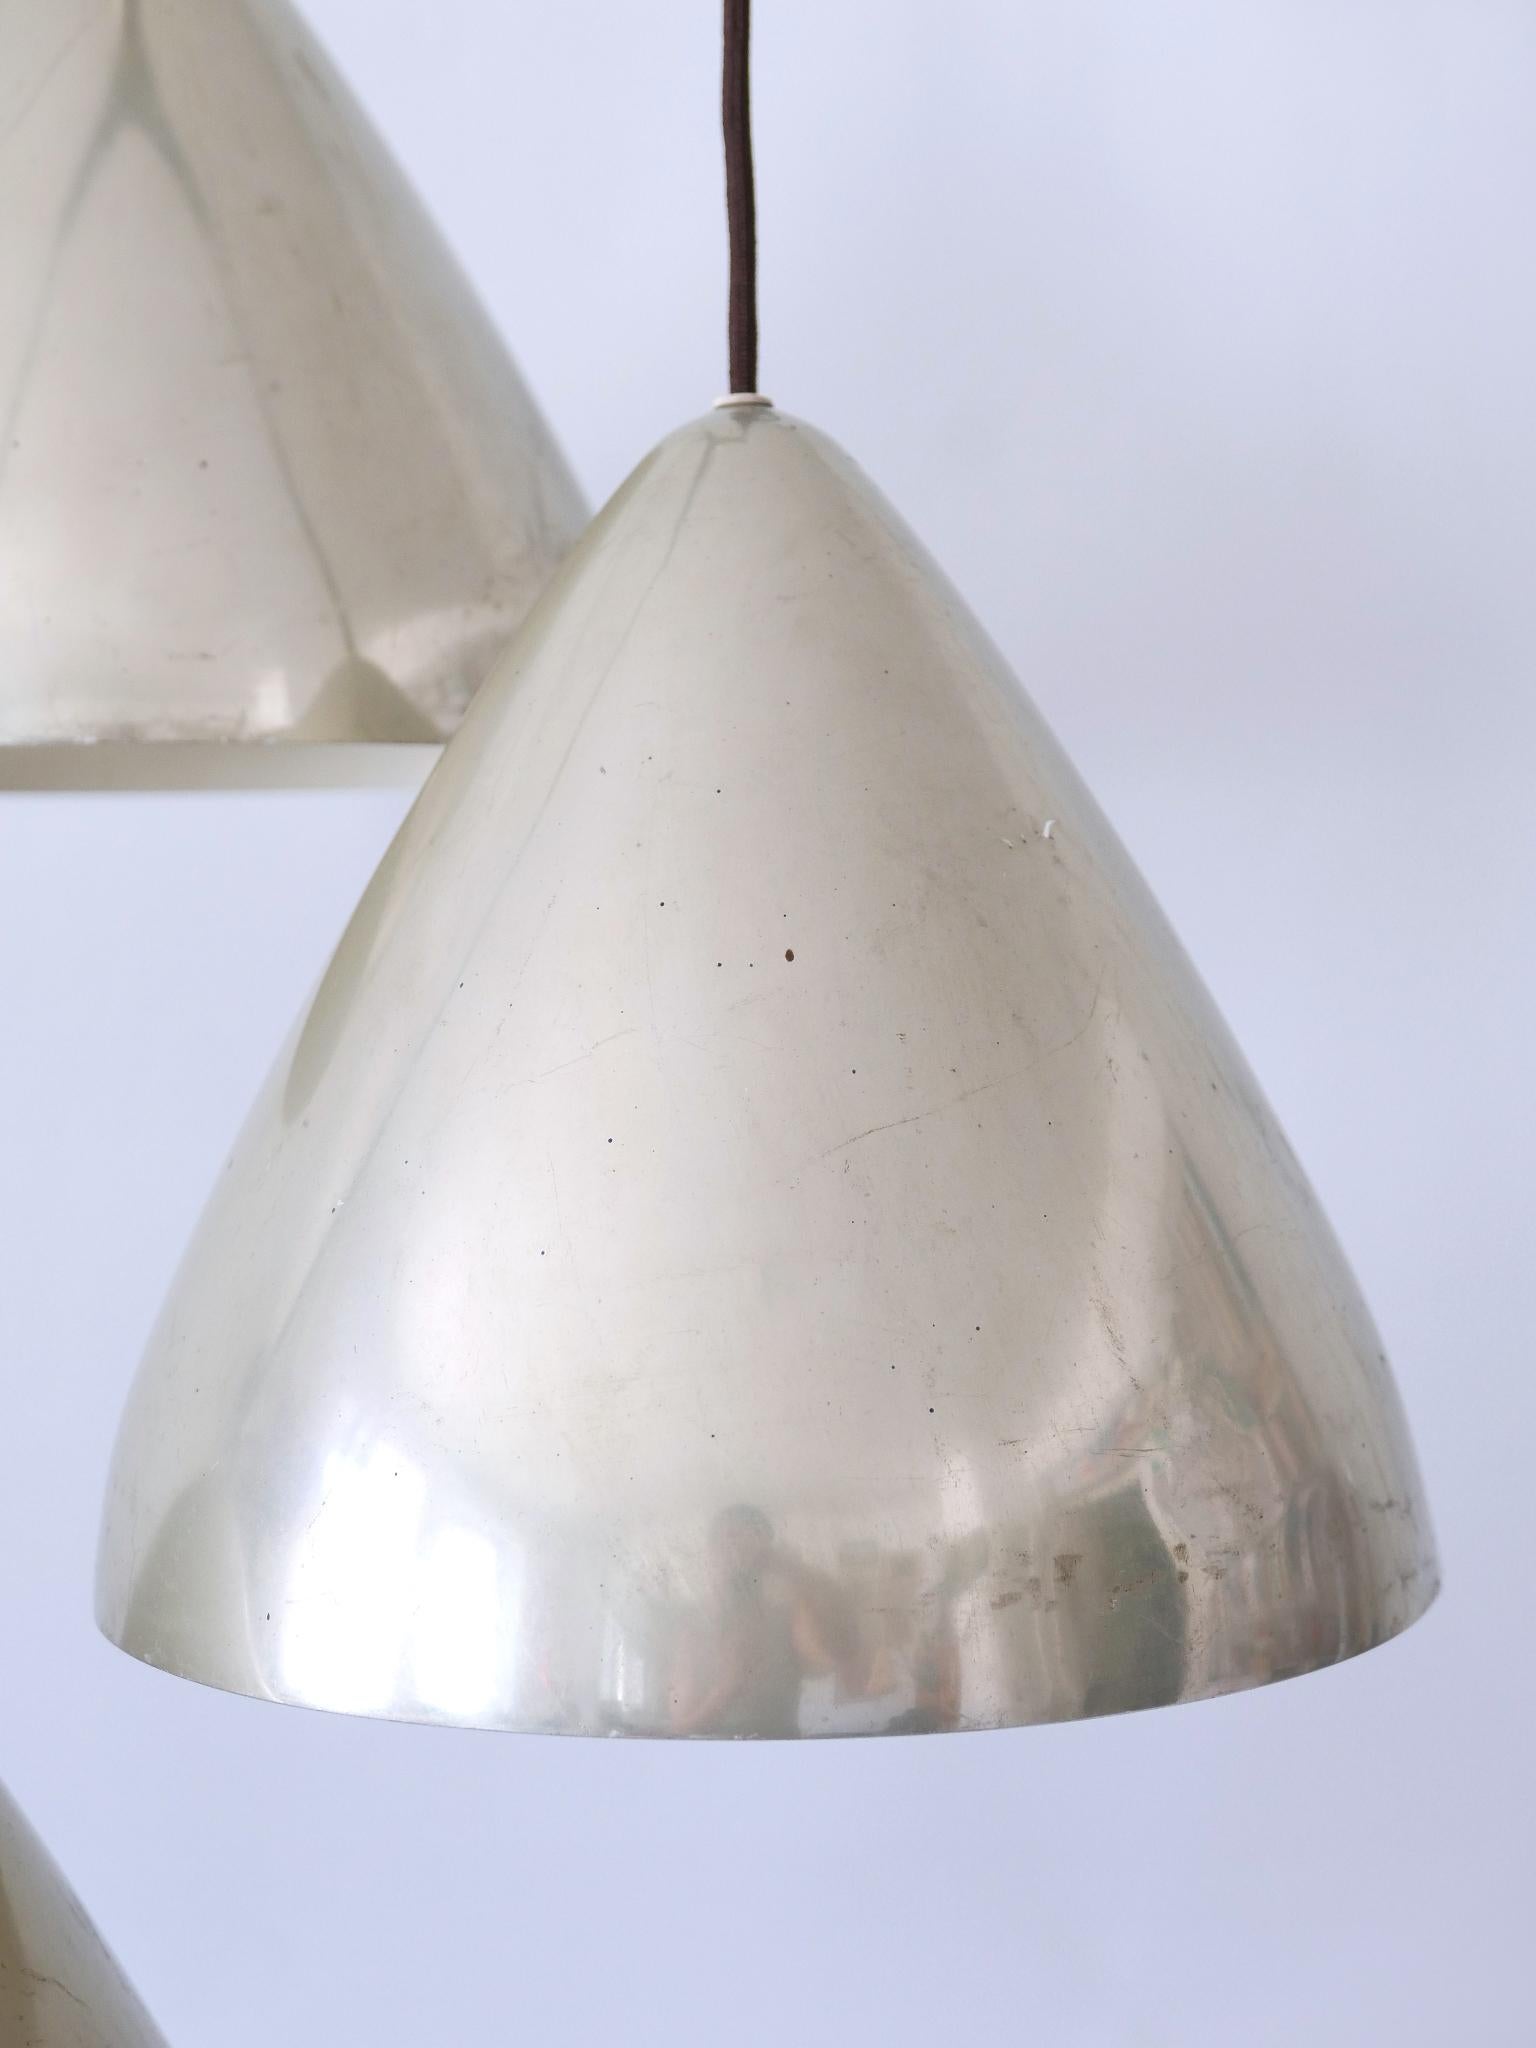 Elegant Cascading Pendant Lamp by Lisa Johansson-Pape for Orno Finland 1960s For Sale 9